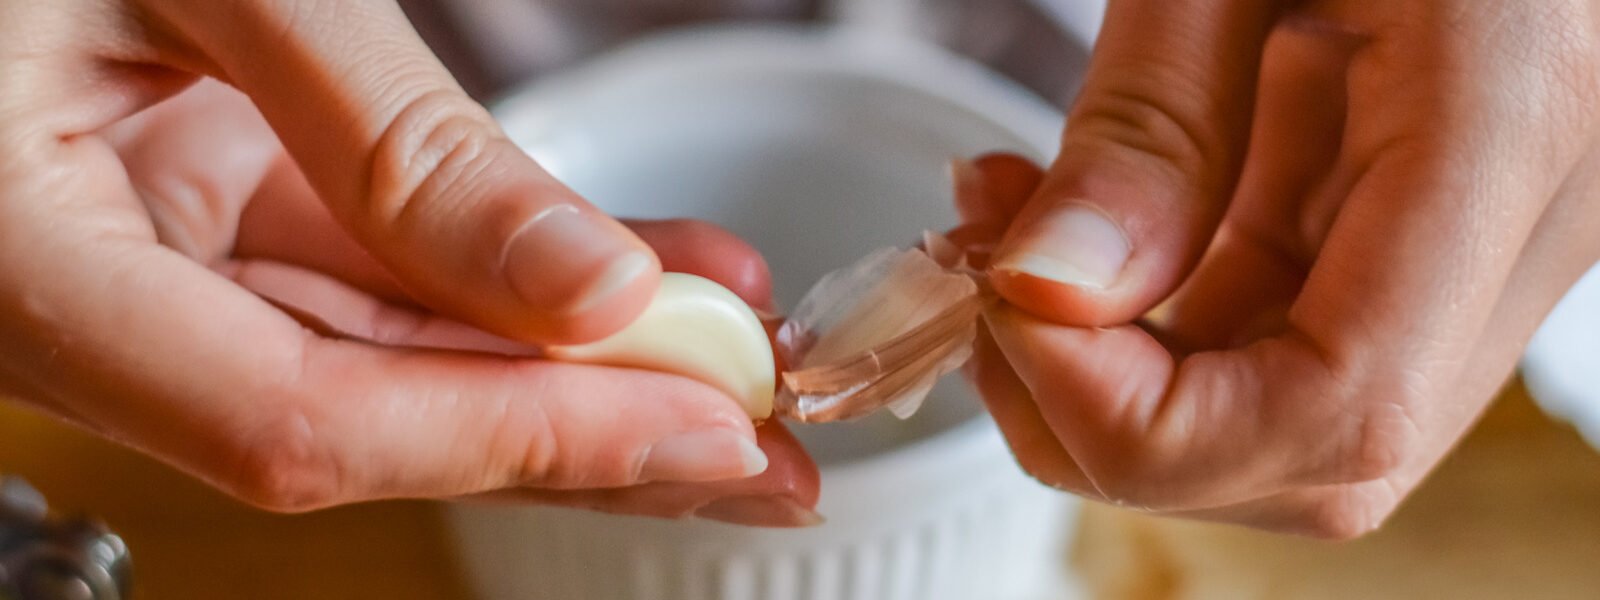 Avoid Eating Garlic At All Costs If You Have This Medical Condition - Health Digest